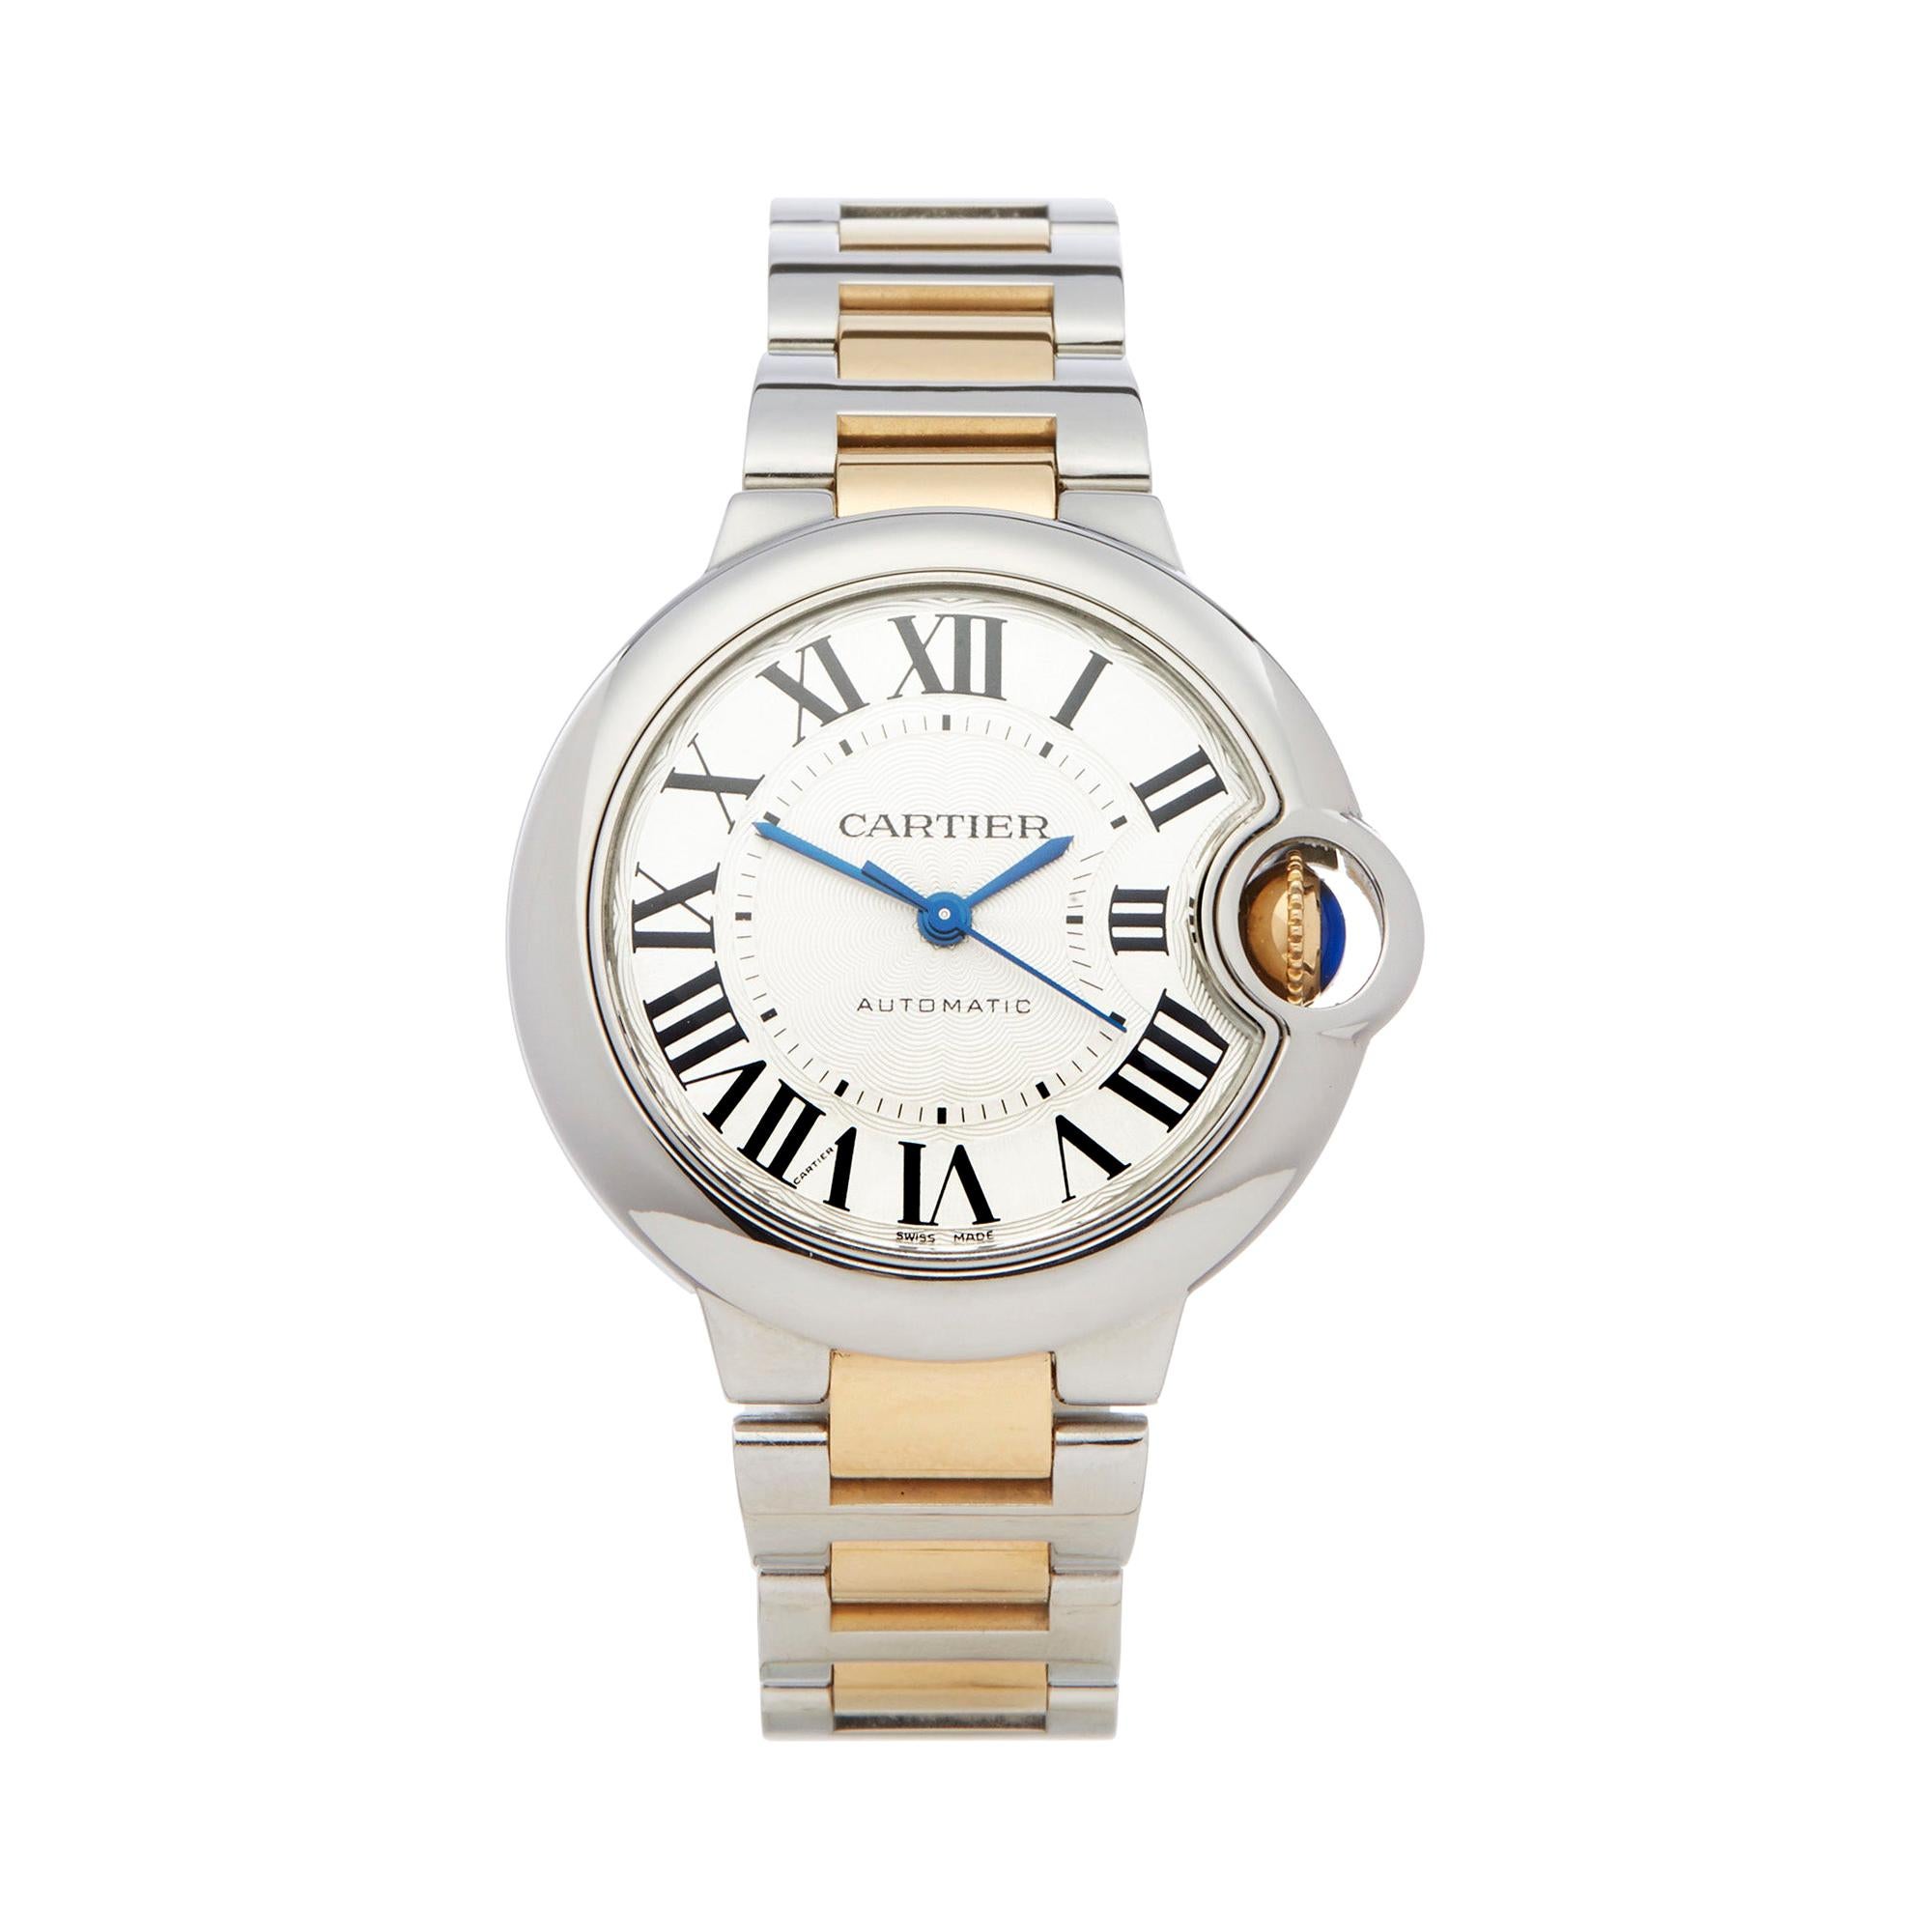 Cartier Ballon Bleu Stainless Steel and Yellow Gold 3489 or W2BB0002